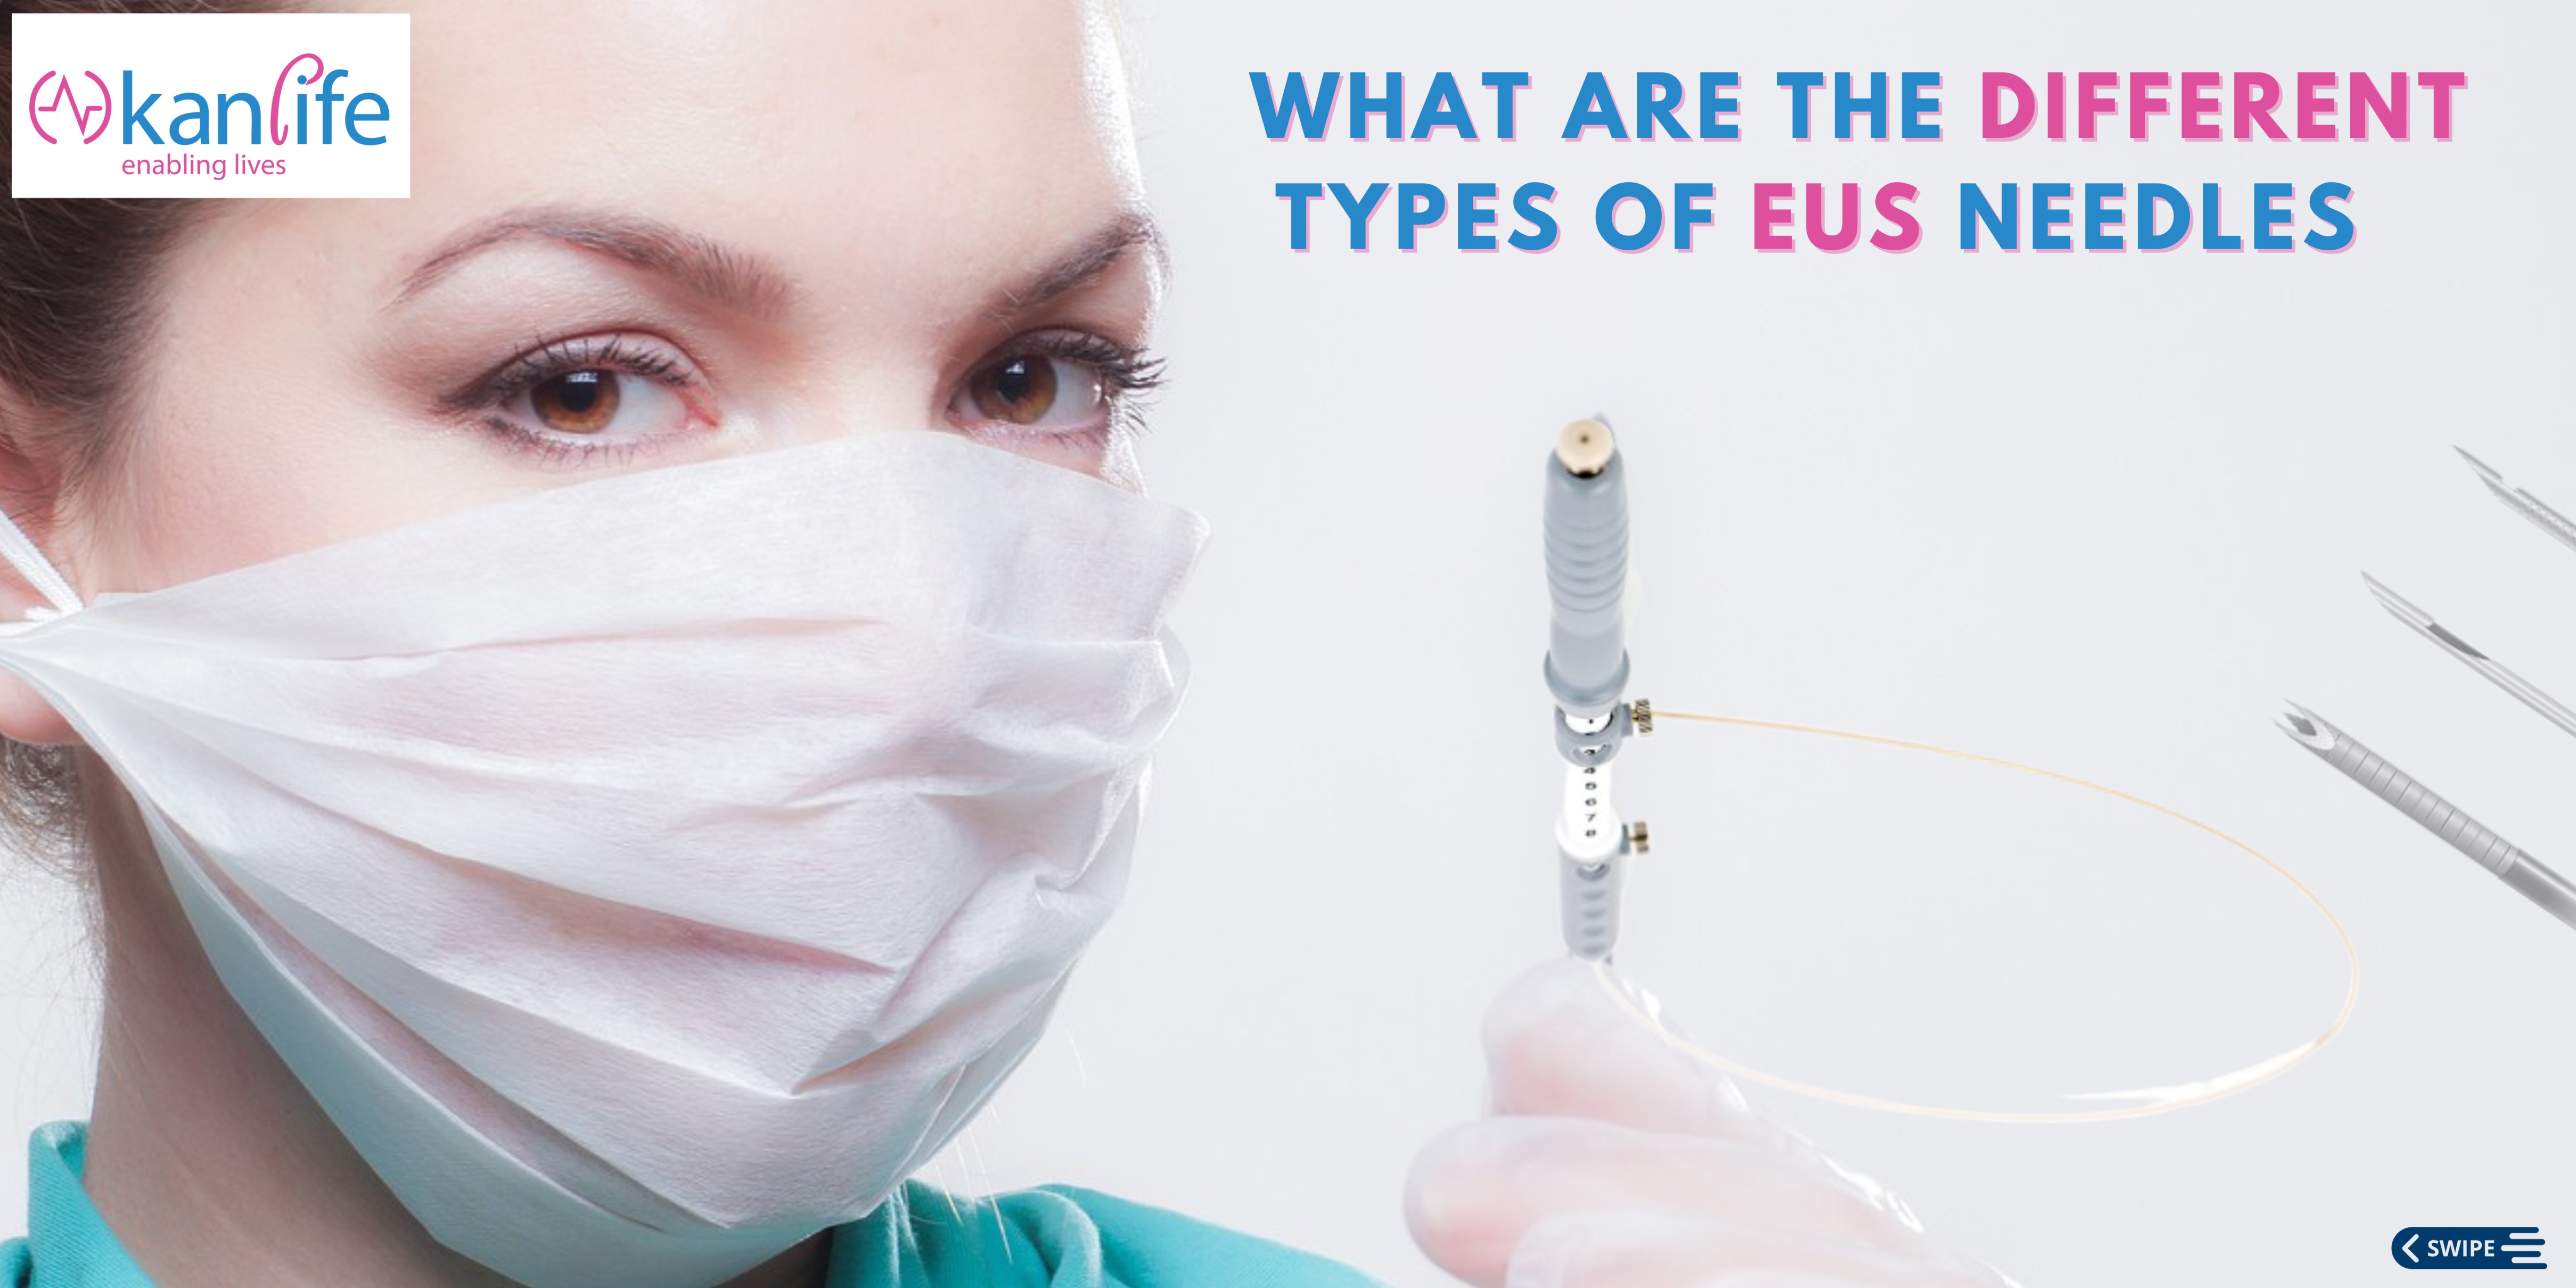 What Are the Different Types of EUS Needles?